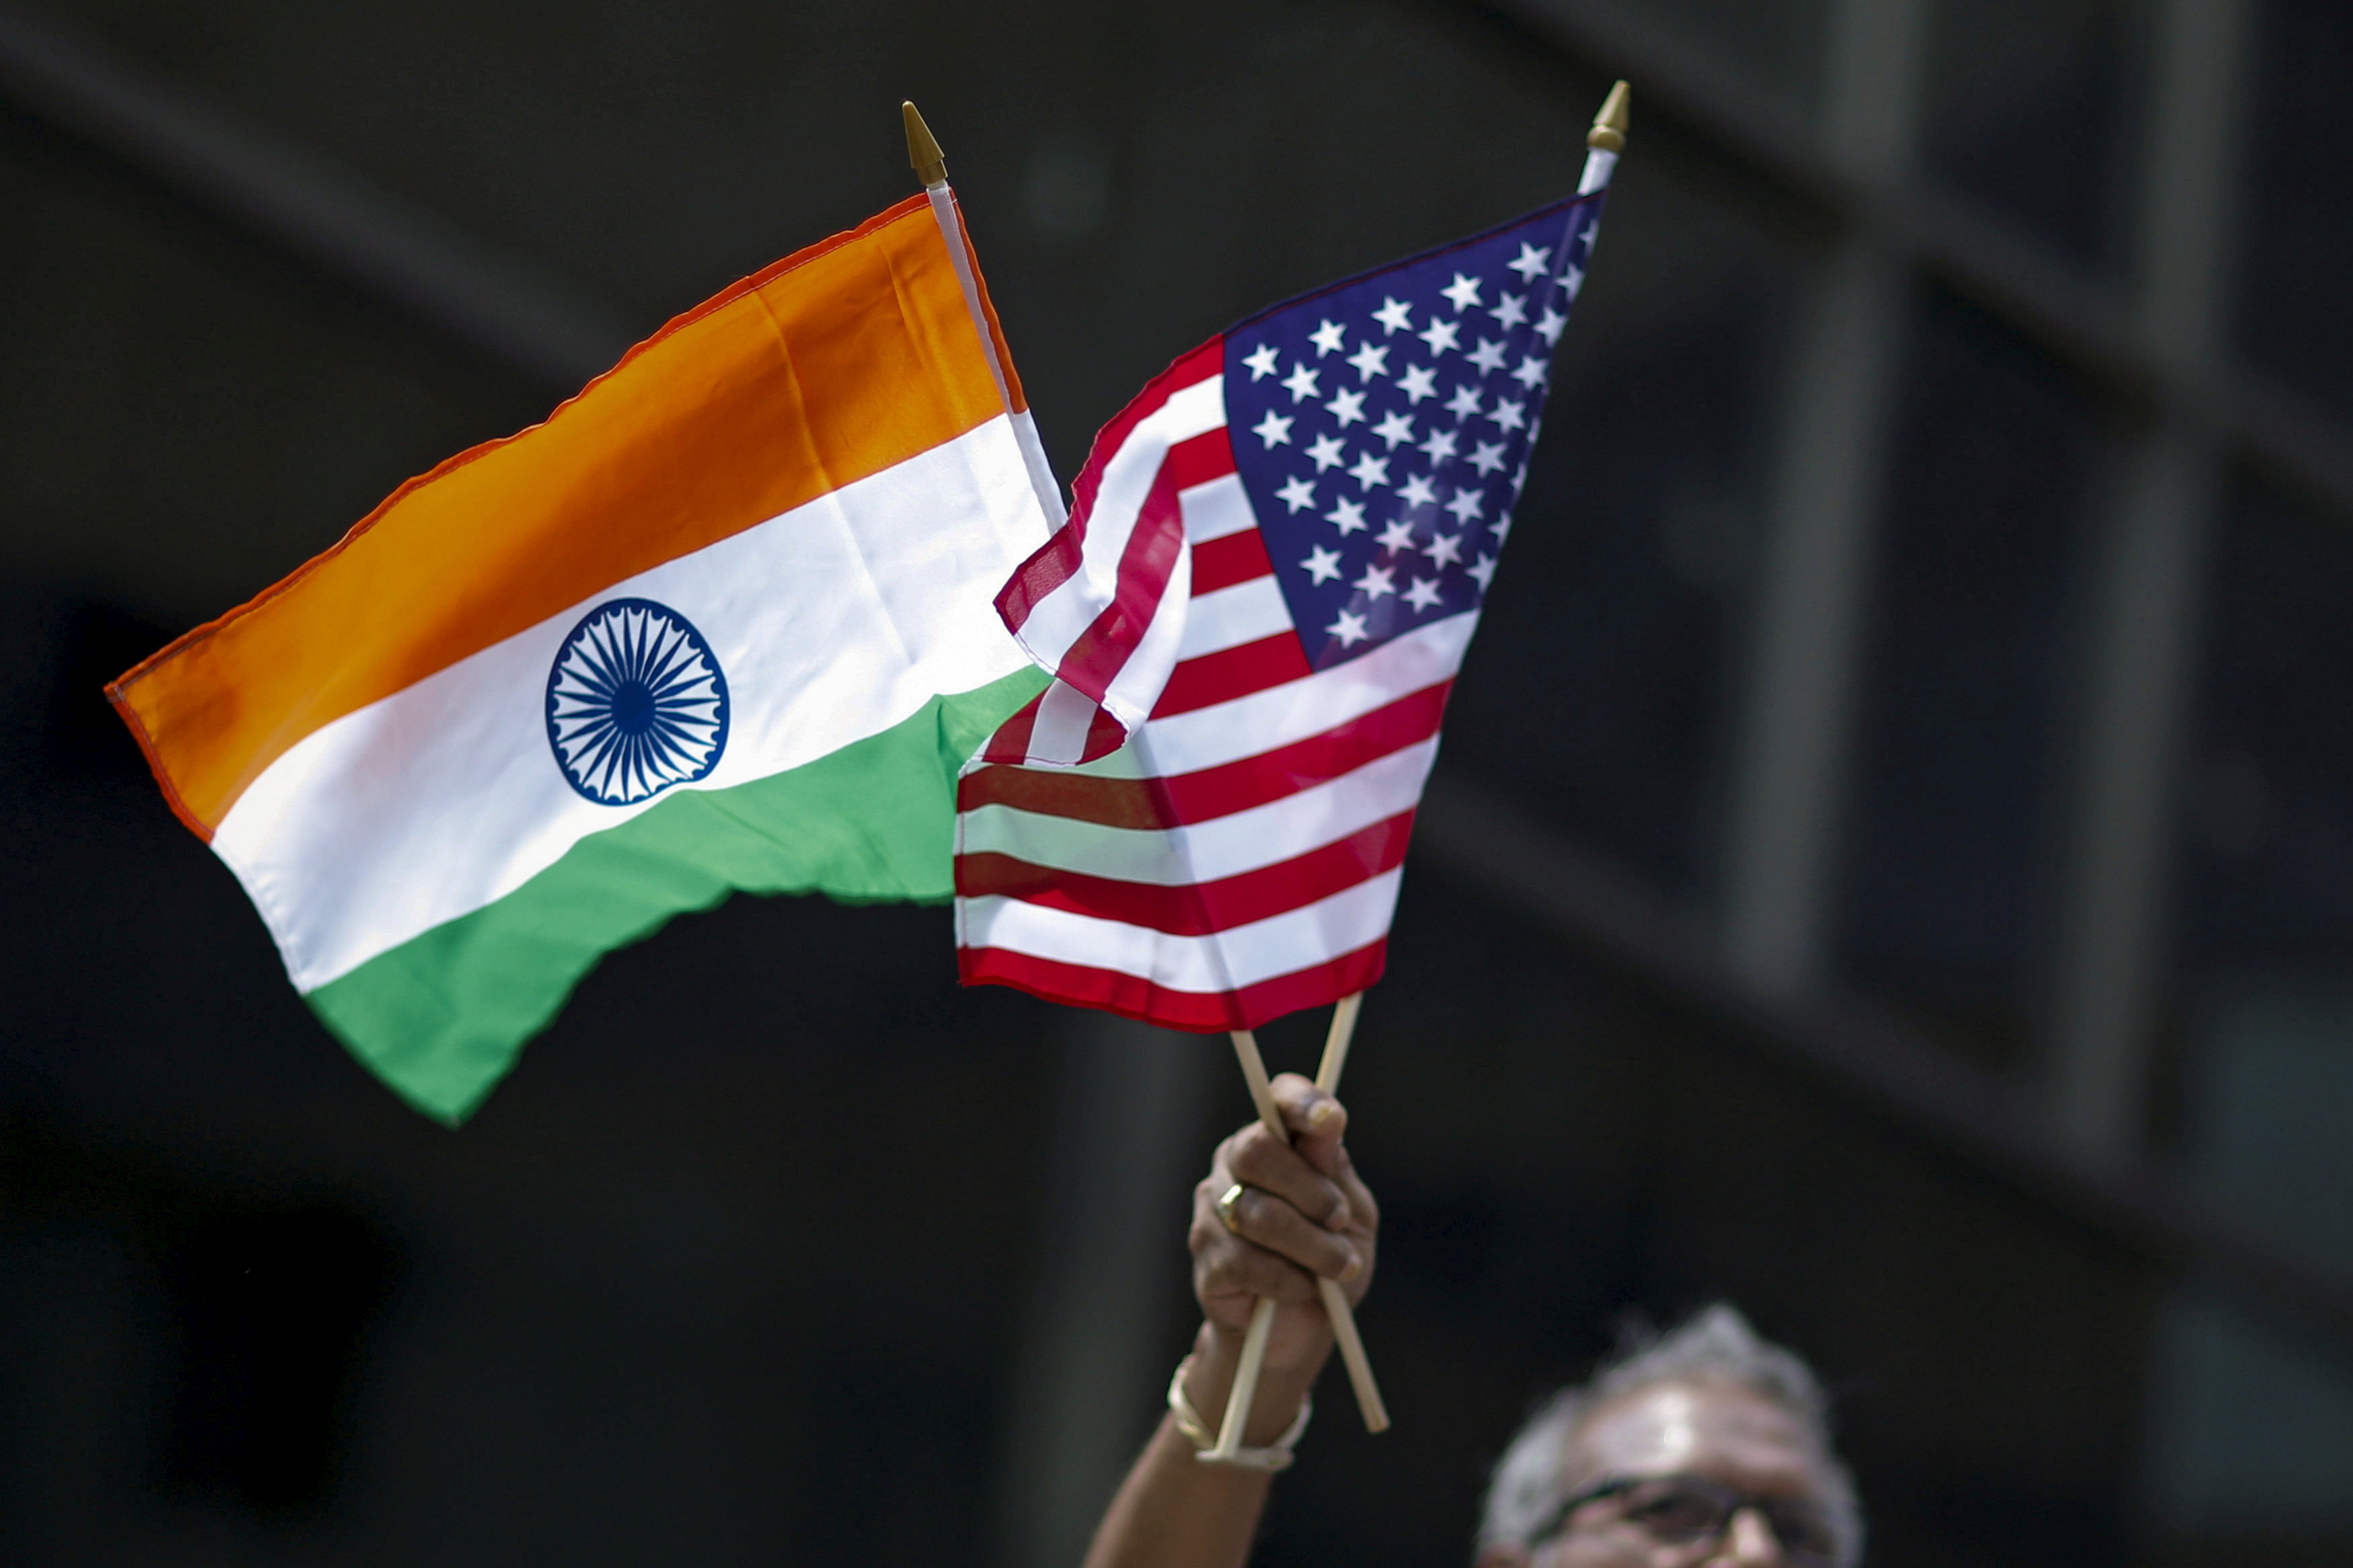  A man holds the flags of India and the US. (Reuters Photo)